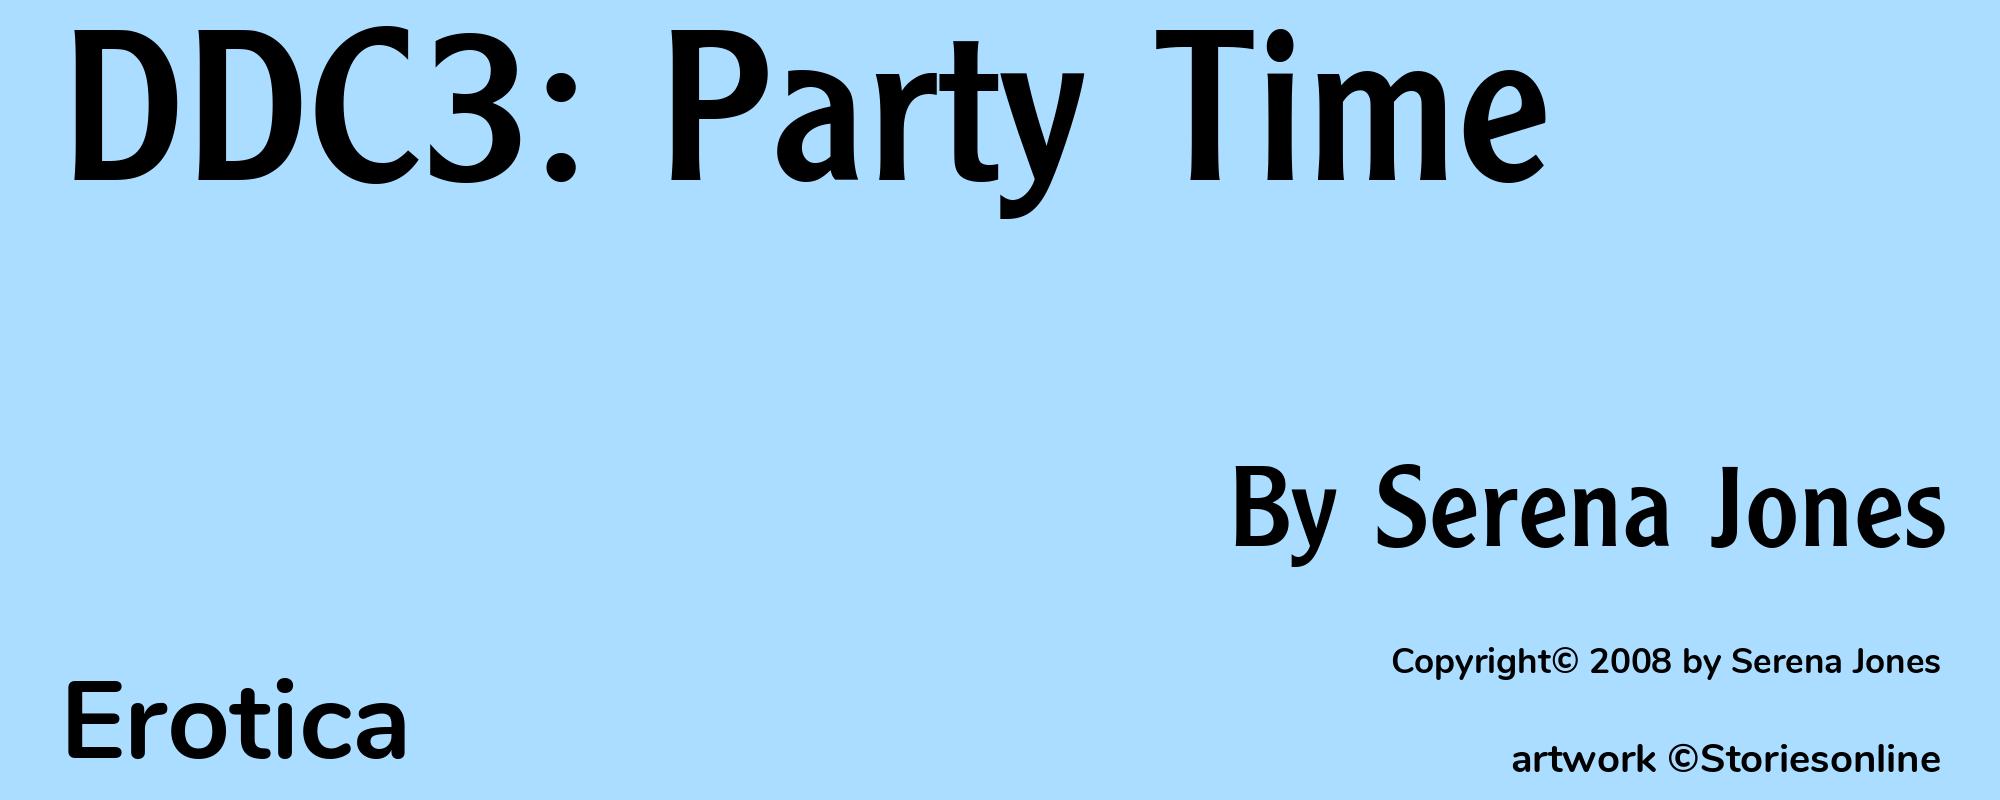 DDC3: Party Time - Cover